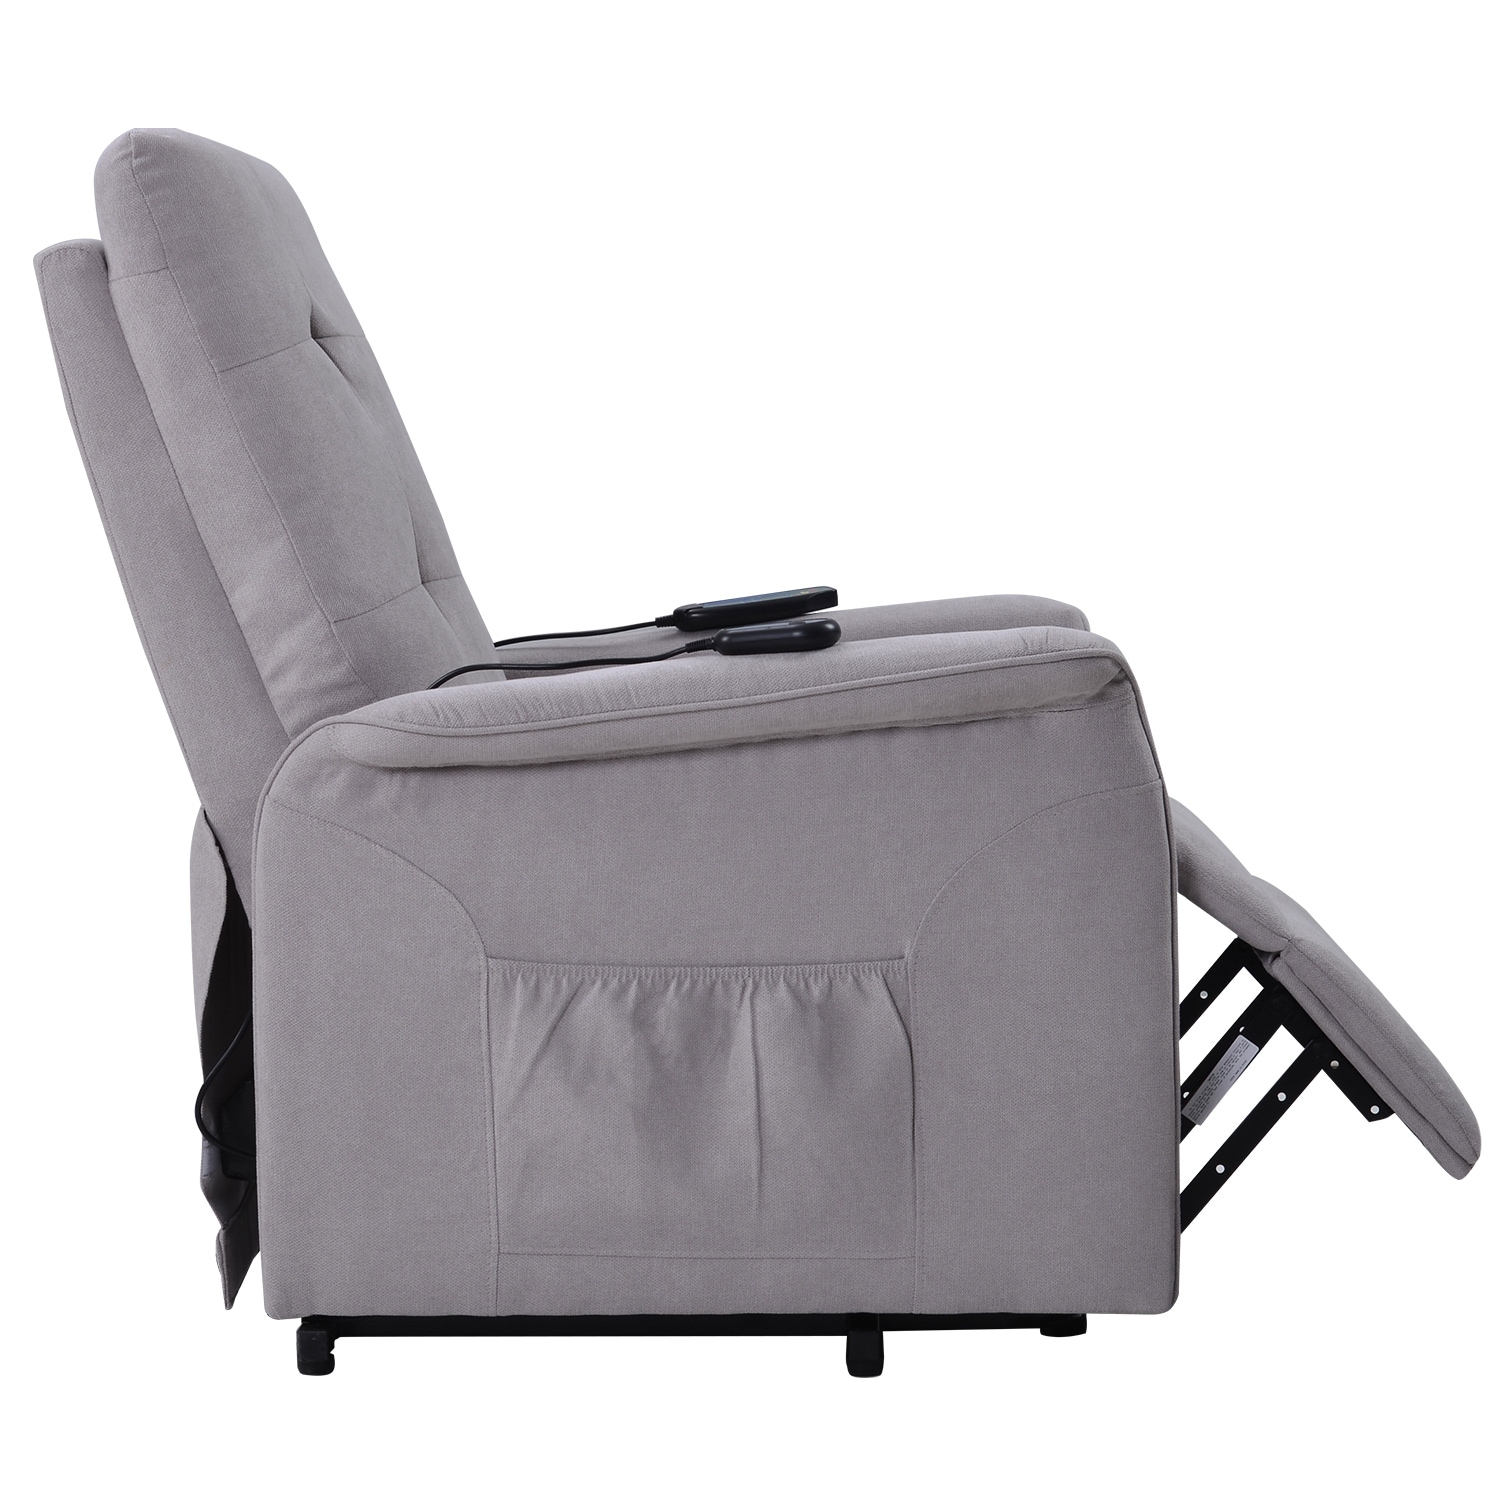 https://ak1.ostkcdn.com/images/products/is/images/direct/eb2fe39db31cd2764bf737a2d48201413505712b/Power-Lift-Chair-for-Elderly-with-Adjustable-Massage-Function-Recliner-Chair-for-Living-Room.jpg